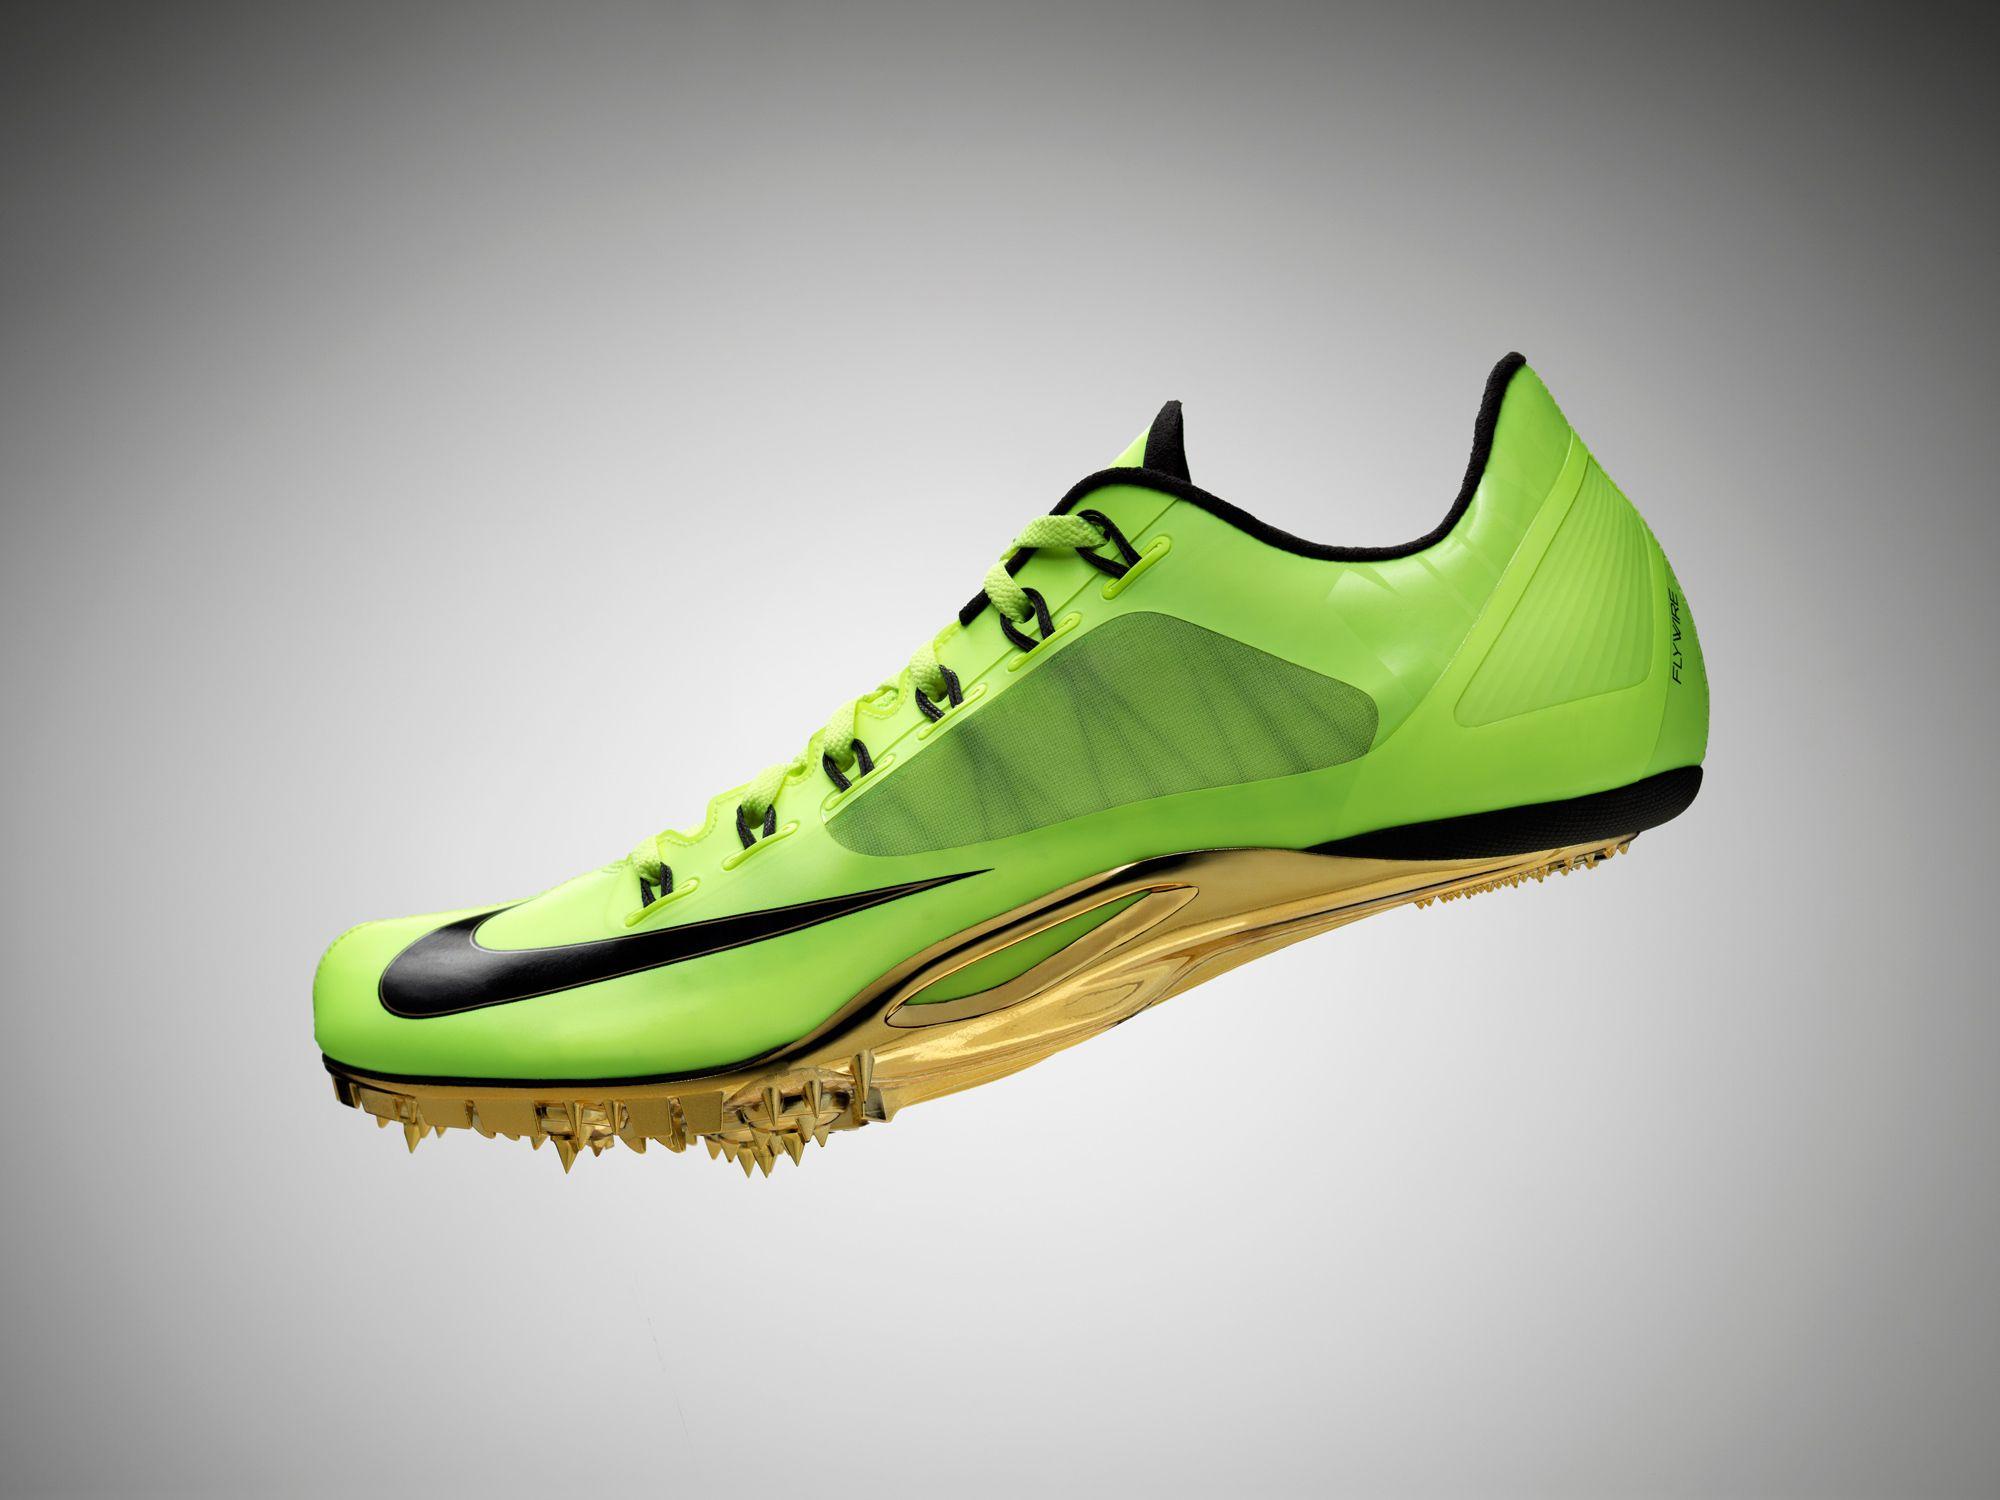 Football boots wallpaper and image, picture, photo